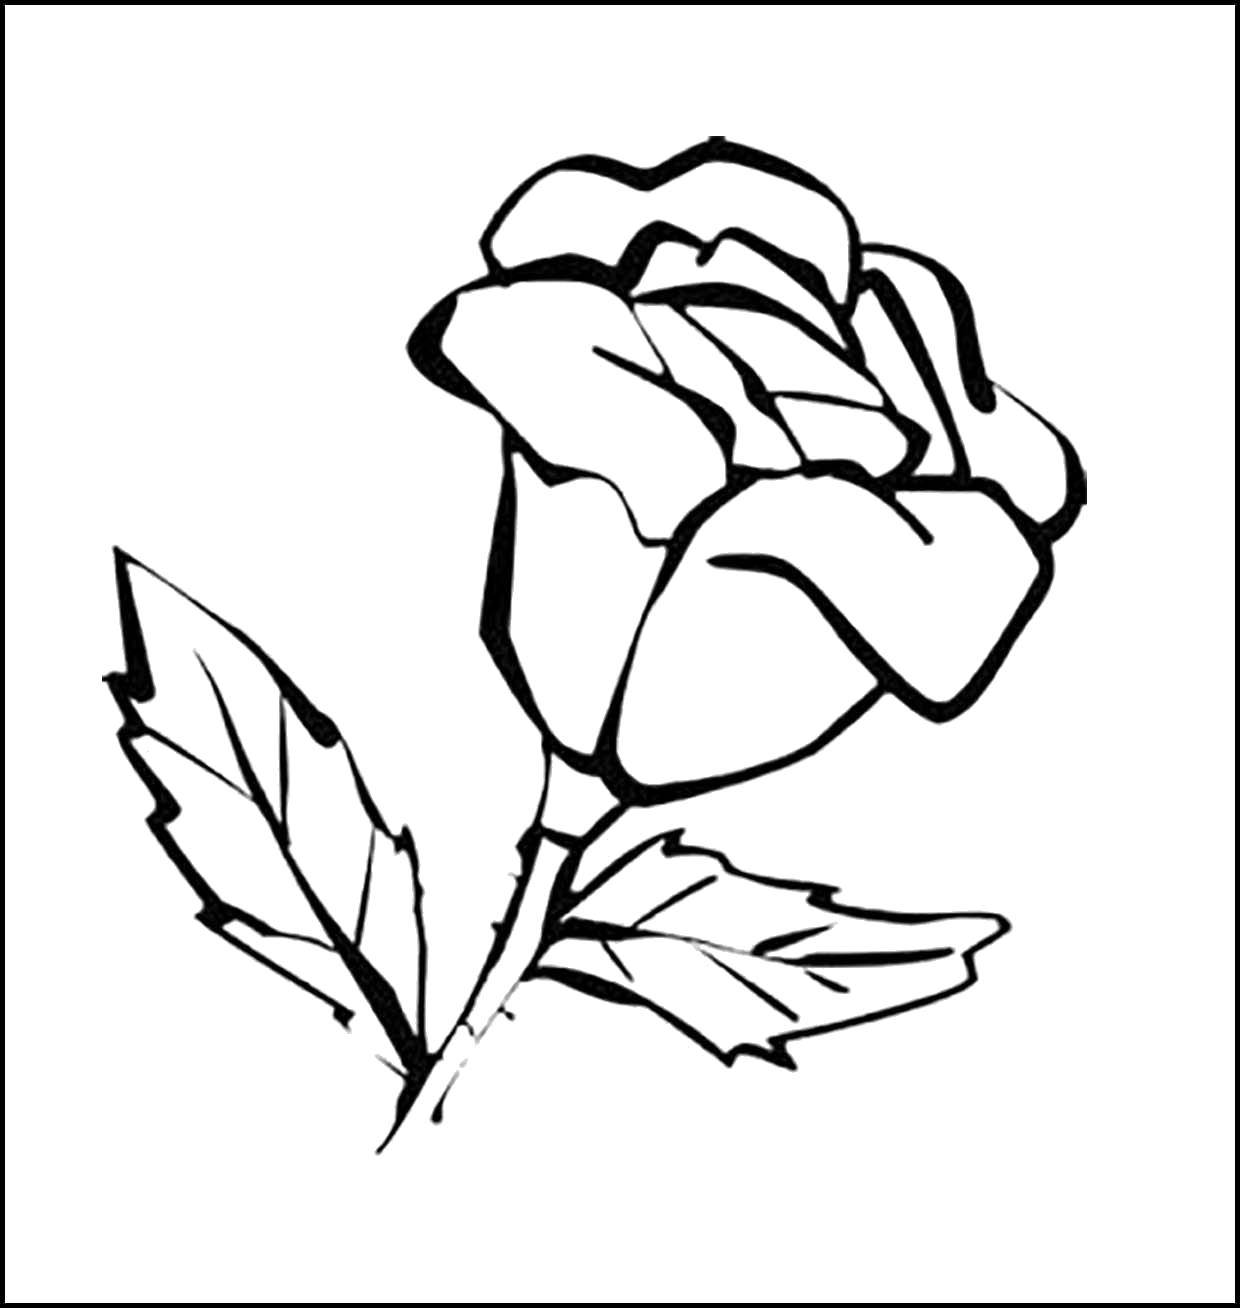 Coloring Graceful rose. Category flowers. Tags:  Flowers, roses.